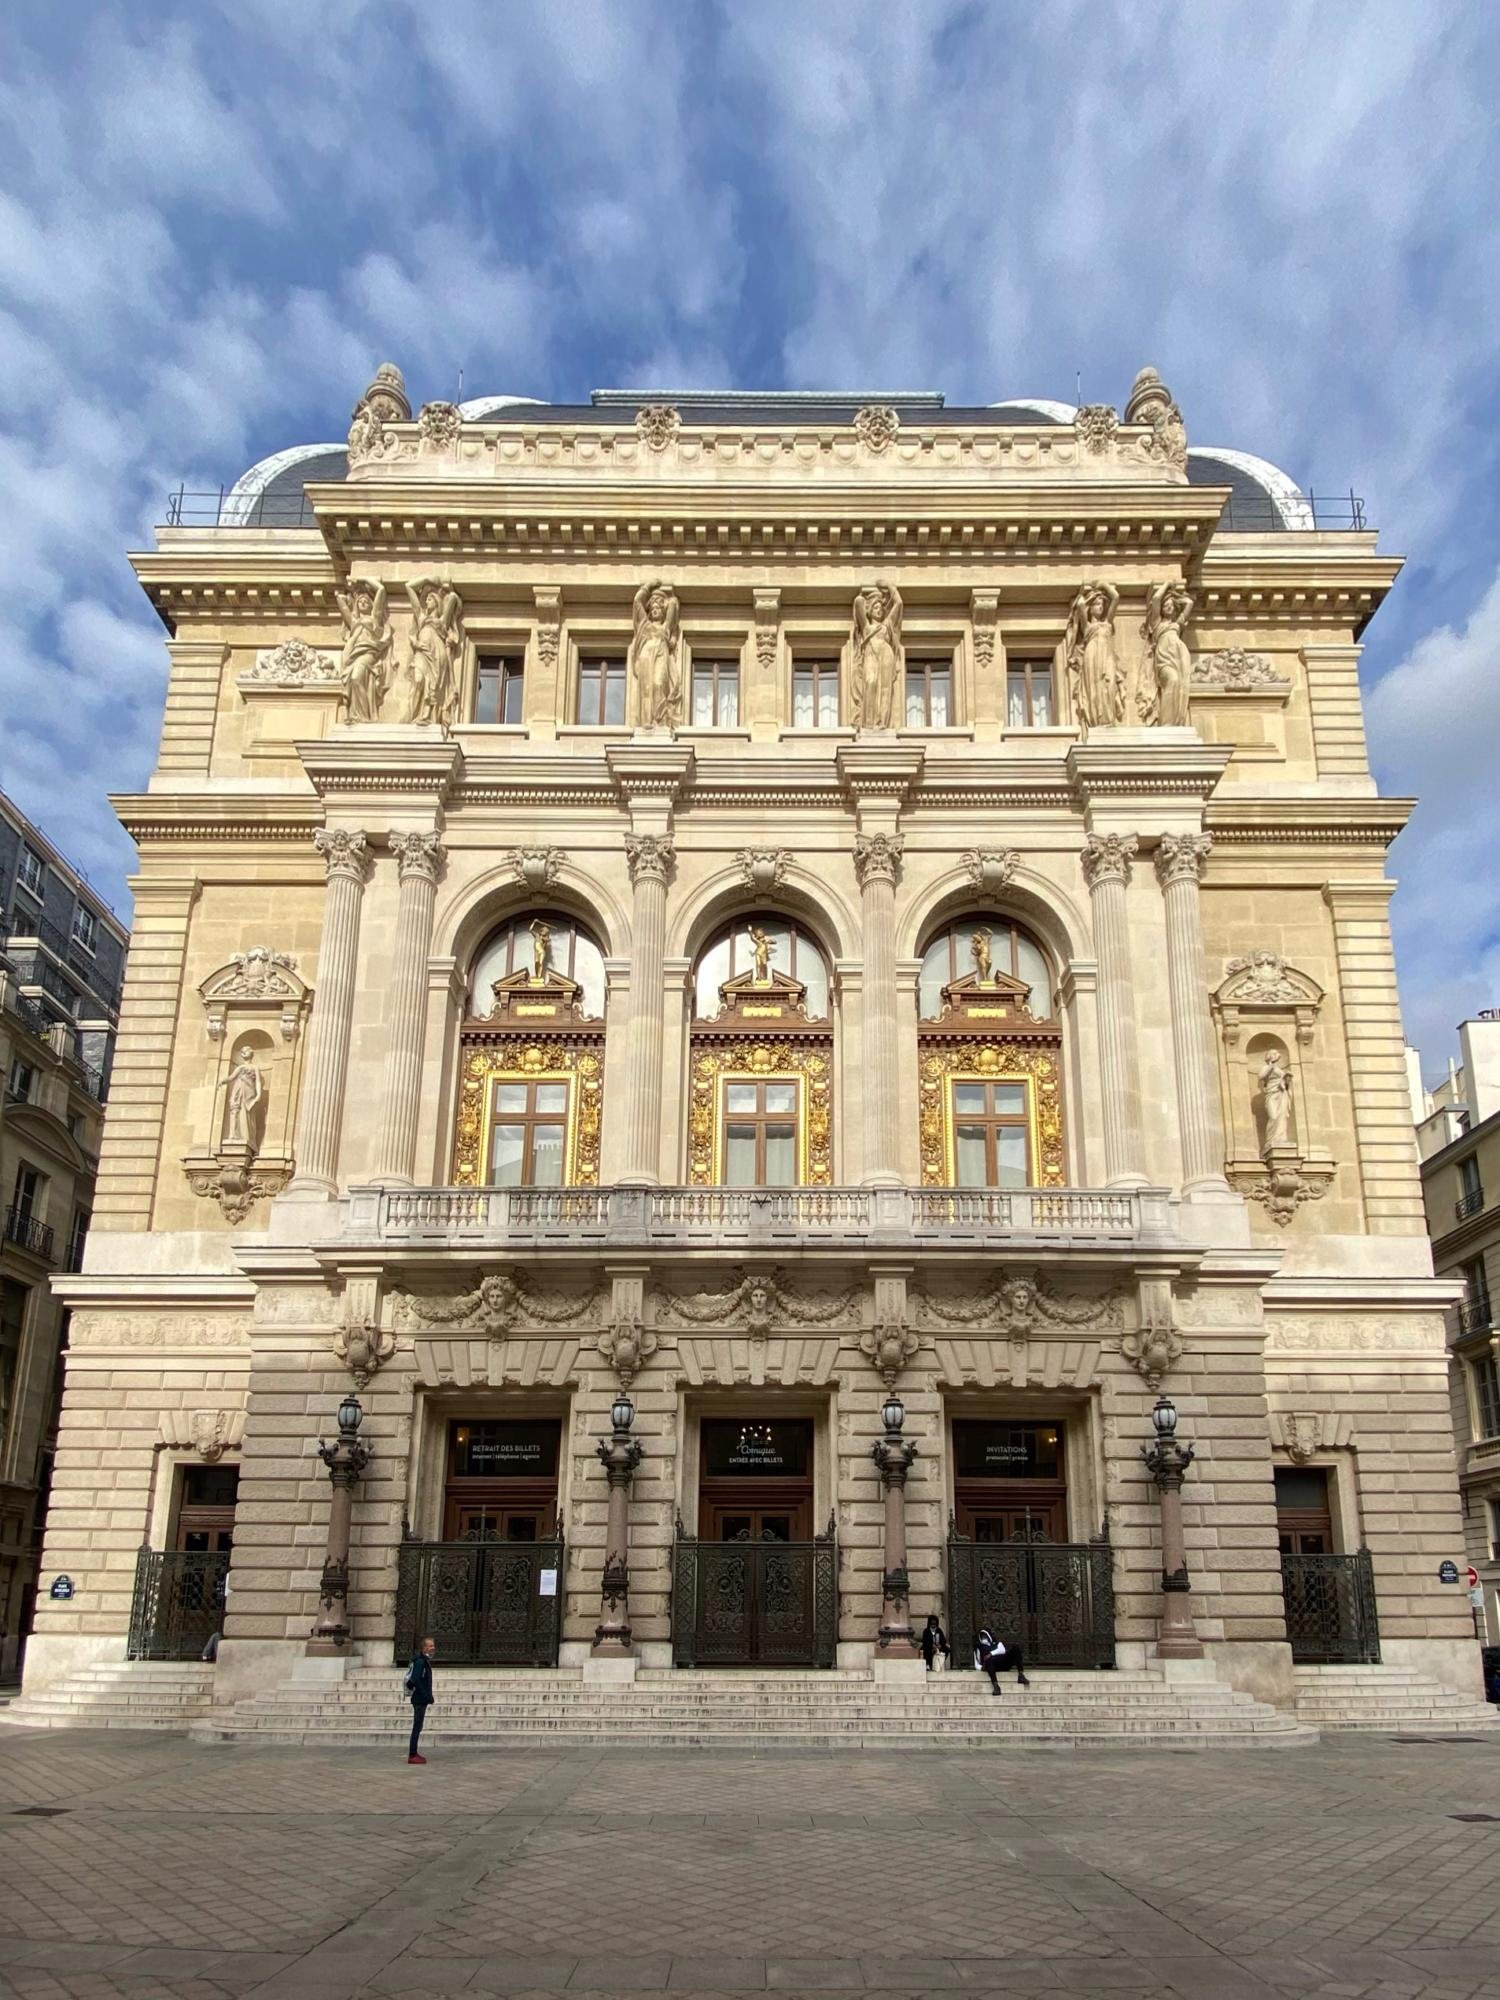 The Opera comic stands behind the Hôtel Gramont